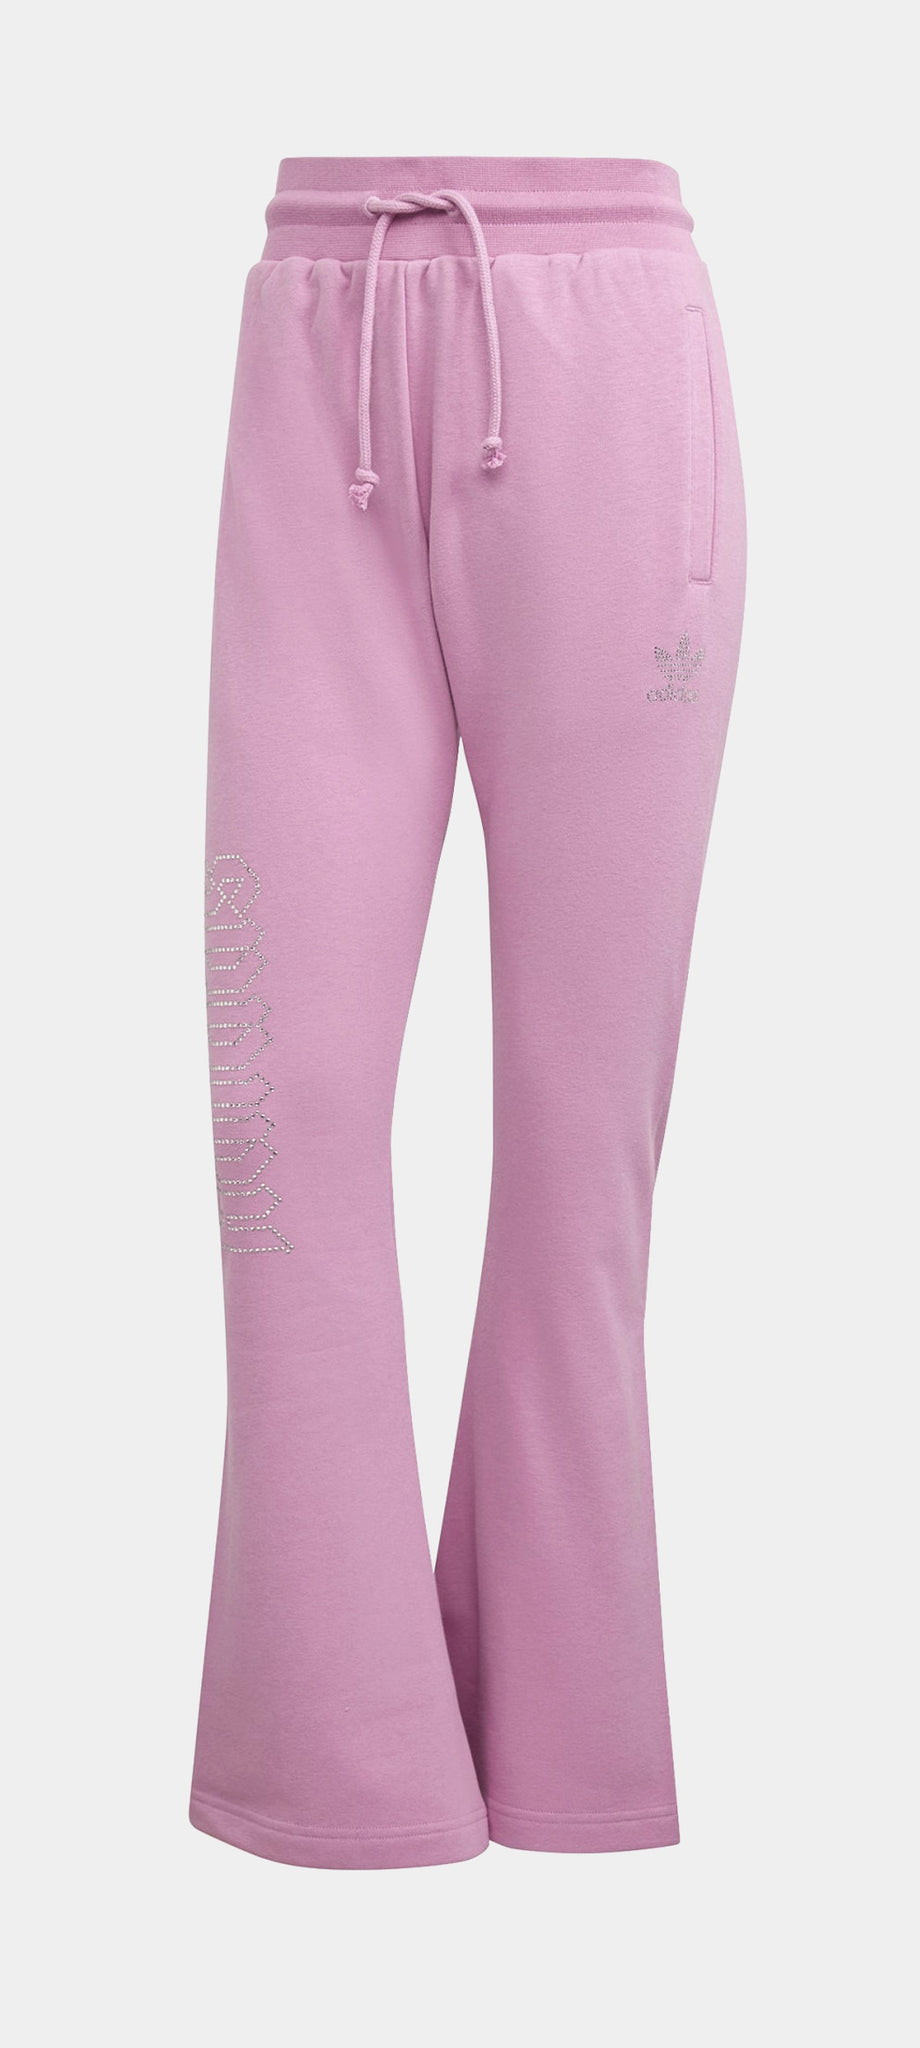 Cotton Track Pants For Women - Purple at Rs 470.00